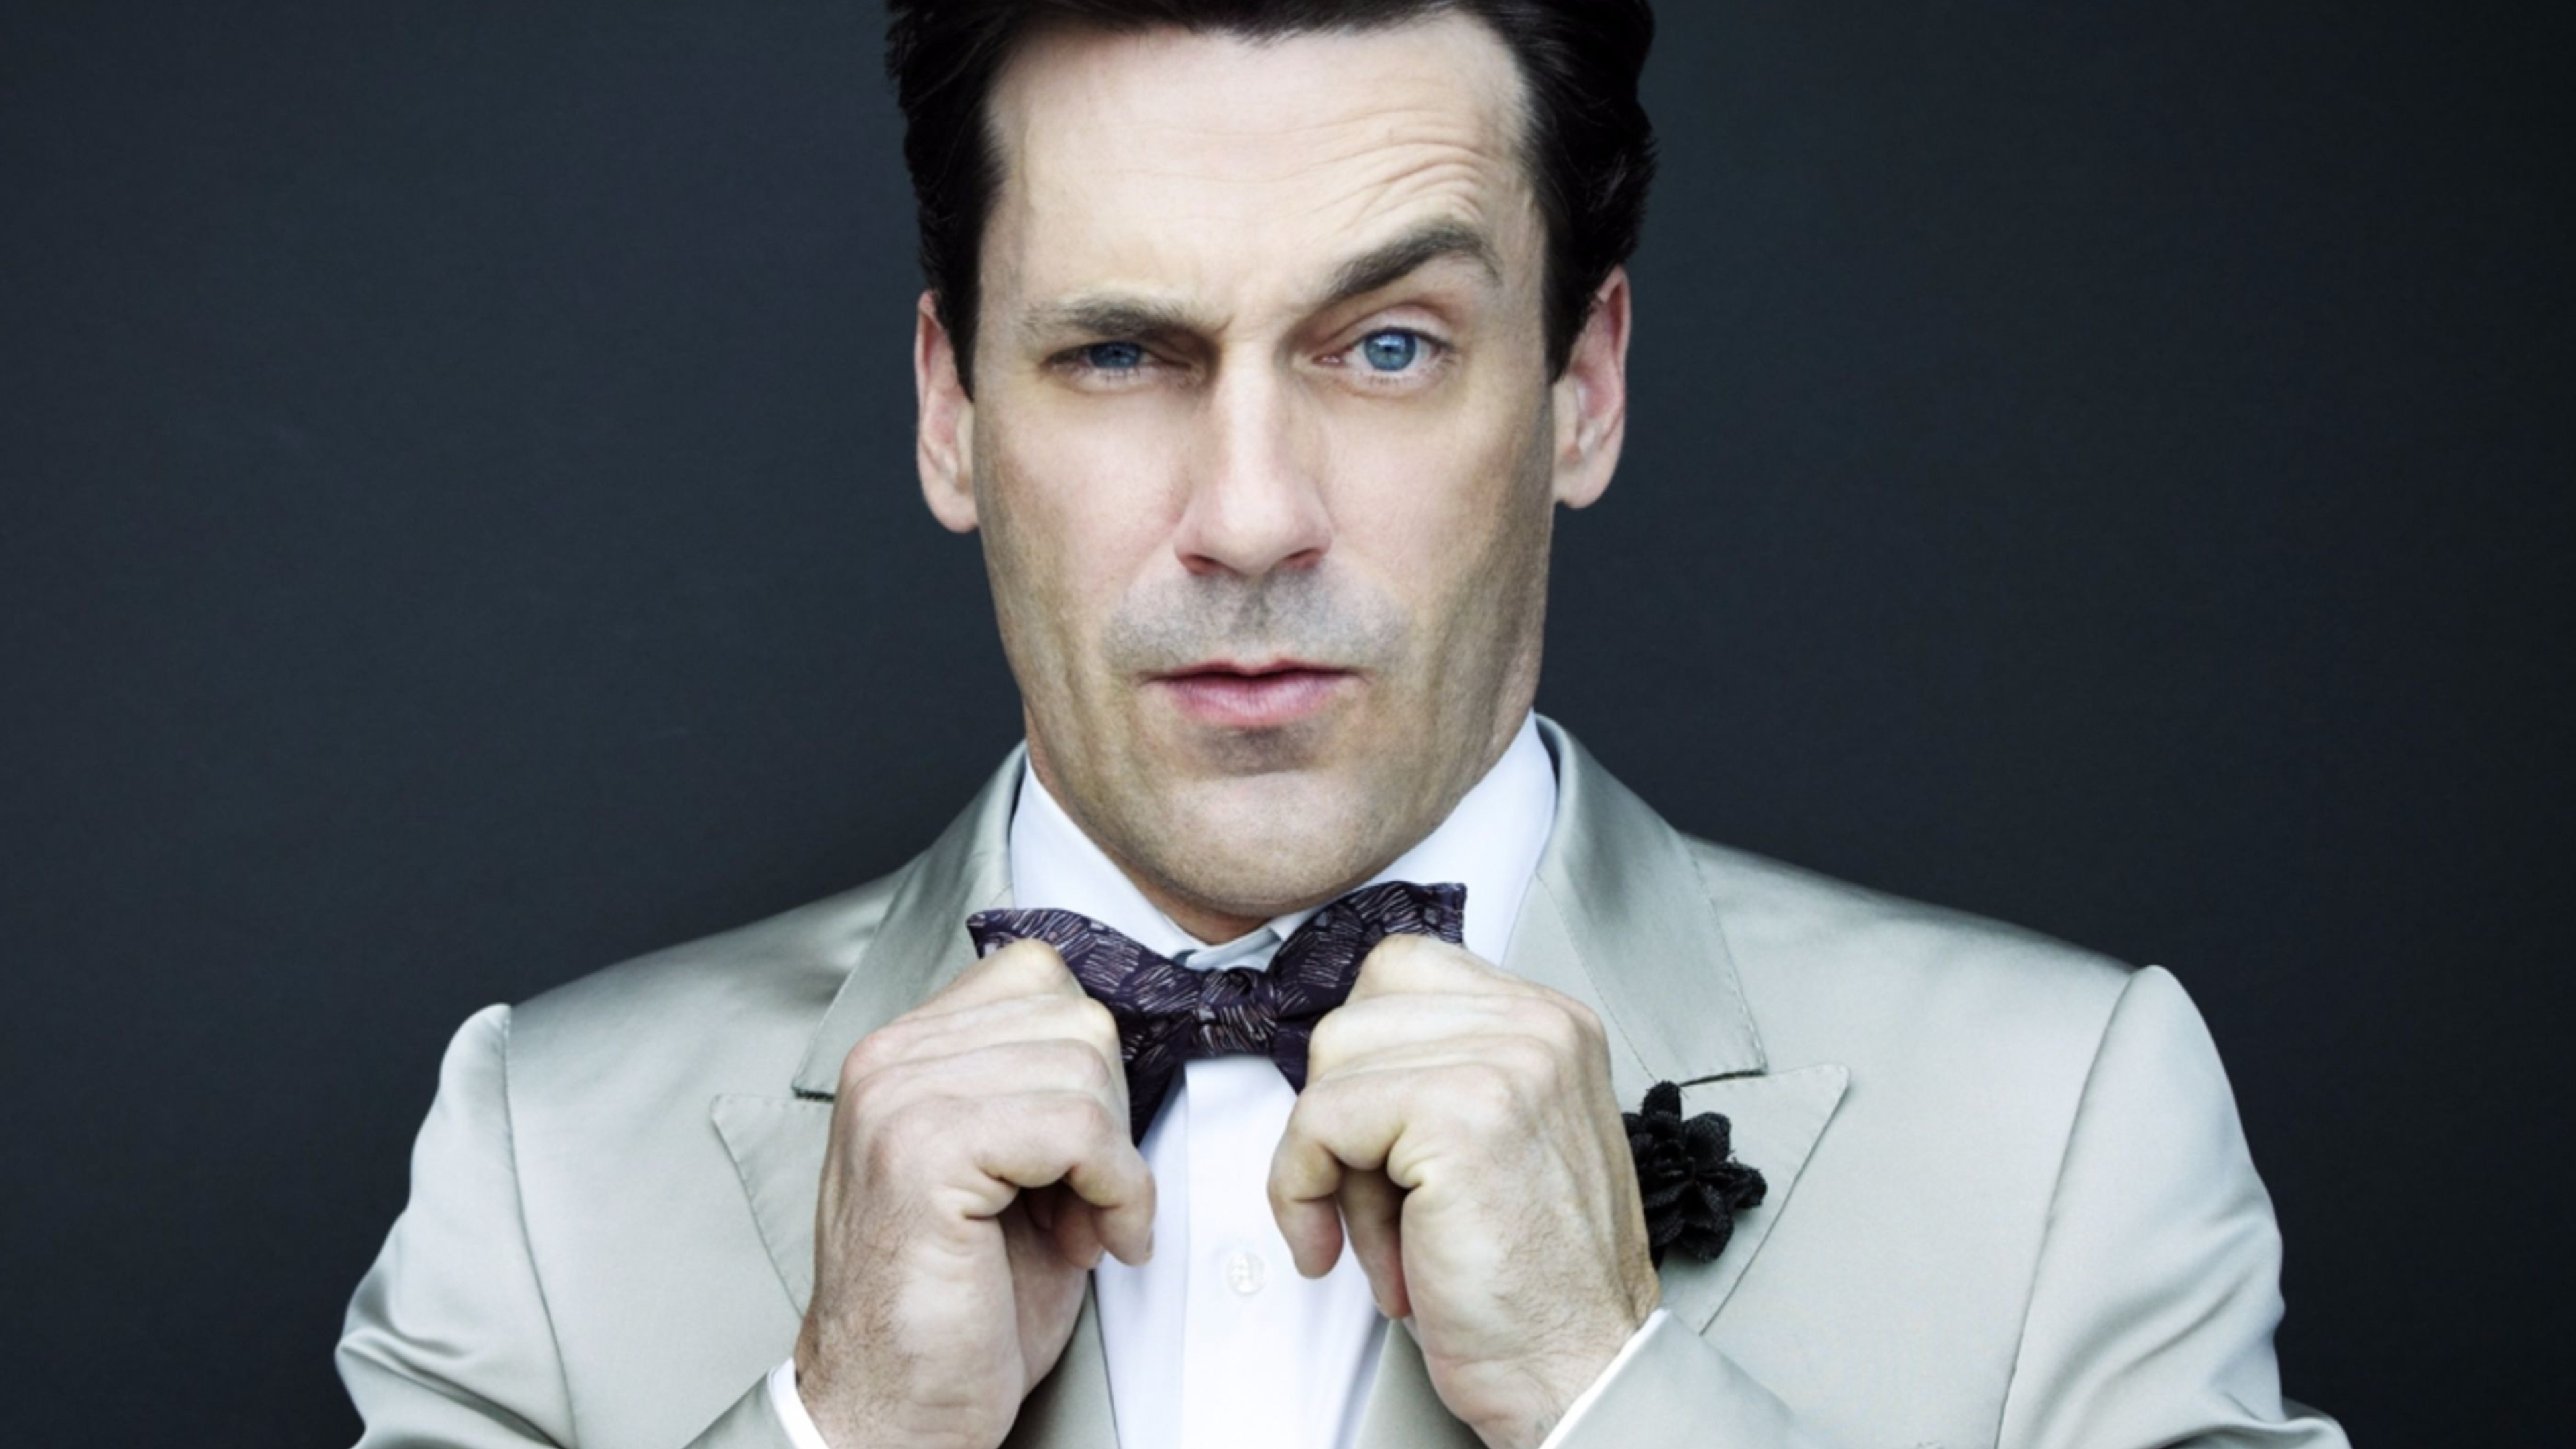 Jon Hamm images, Gallery of pictures, Television star, Hollywood career, 3840x2160 4K Desktop